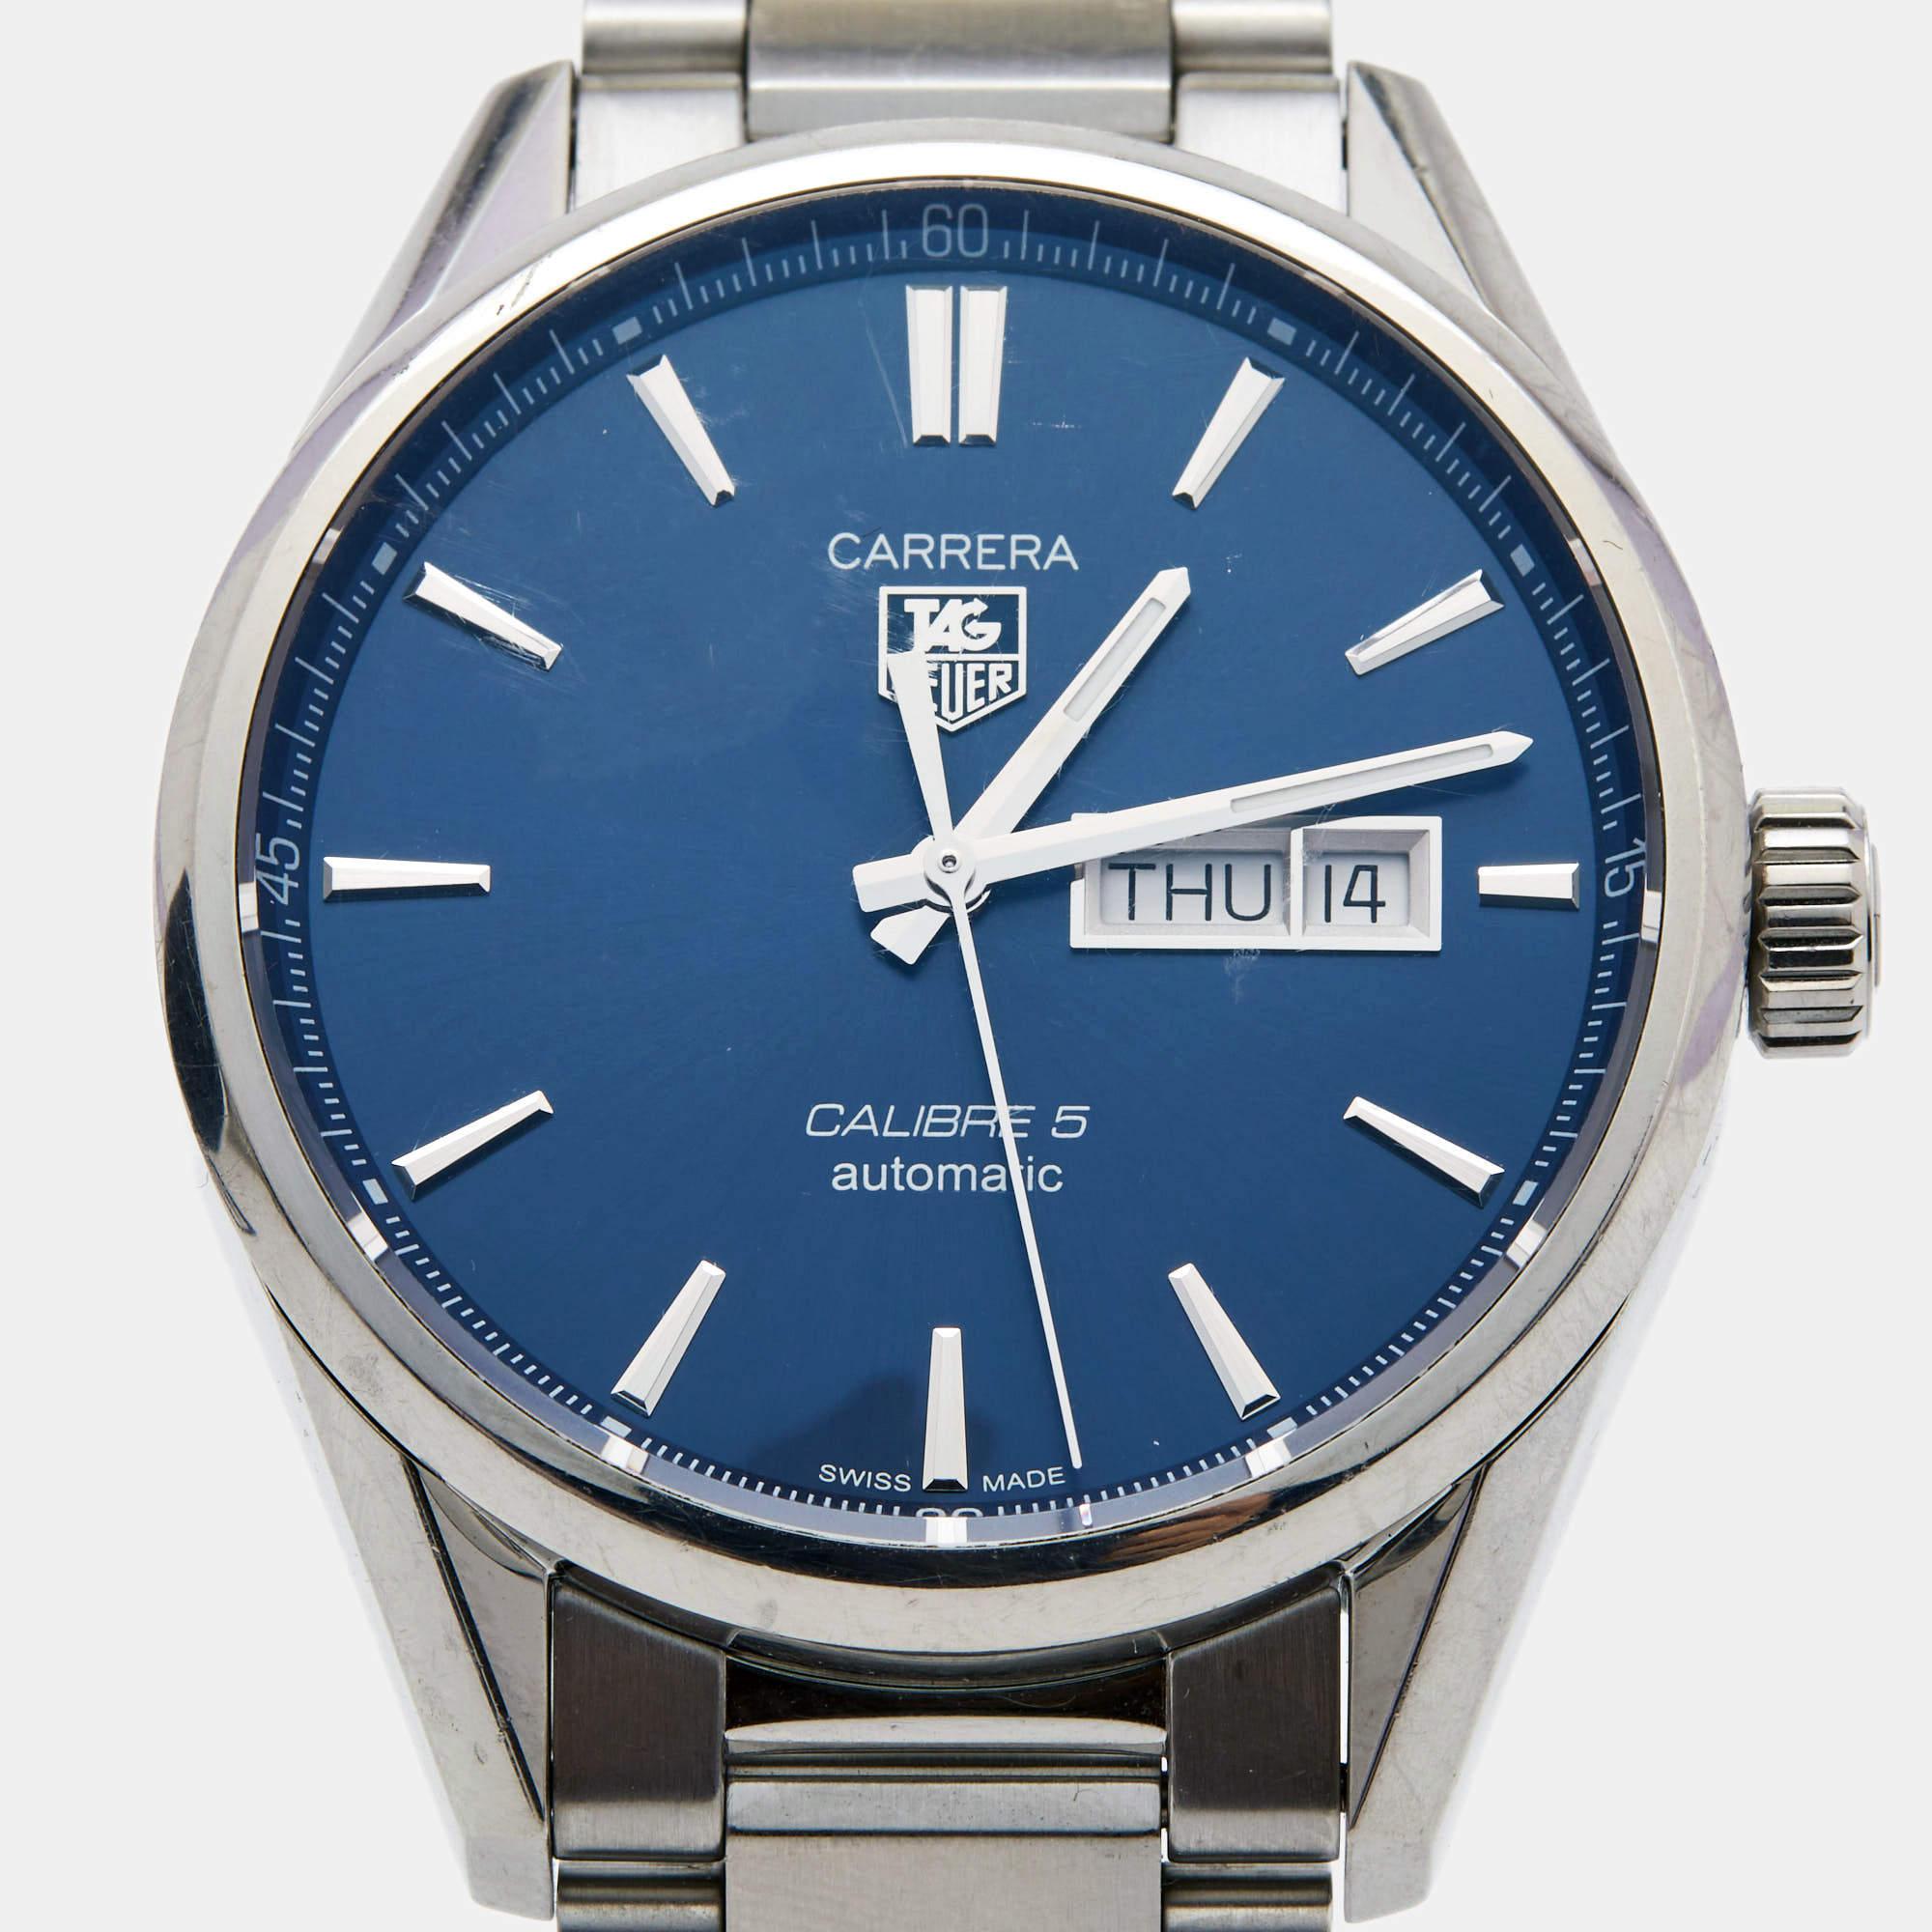 Let this fine TAG Heuer wristwatch accompany you with ease and luxurious style. Beautifully crafted using the best quality materials, this authentic branded watch is built to be a standout accessory for your wrist.

